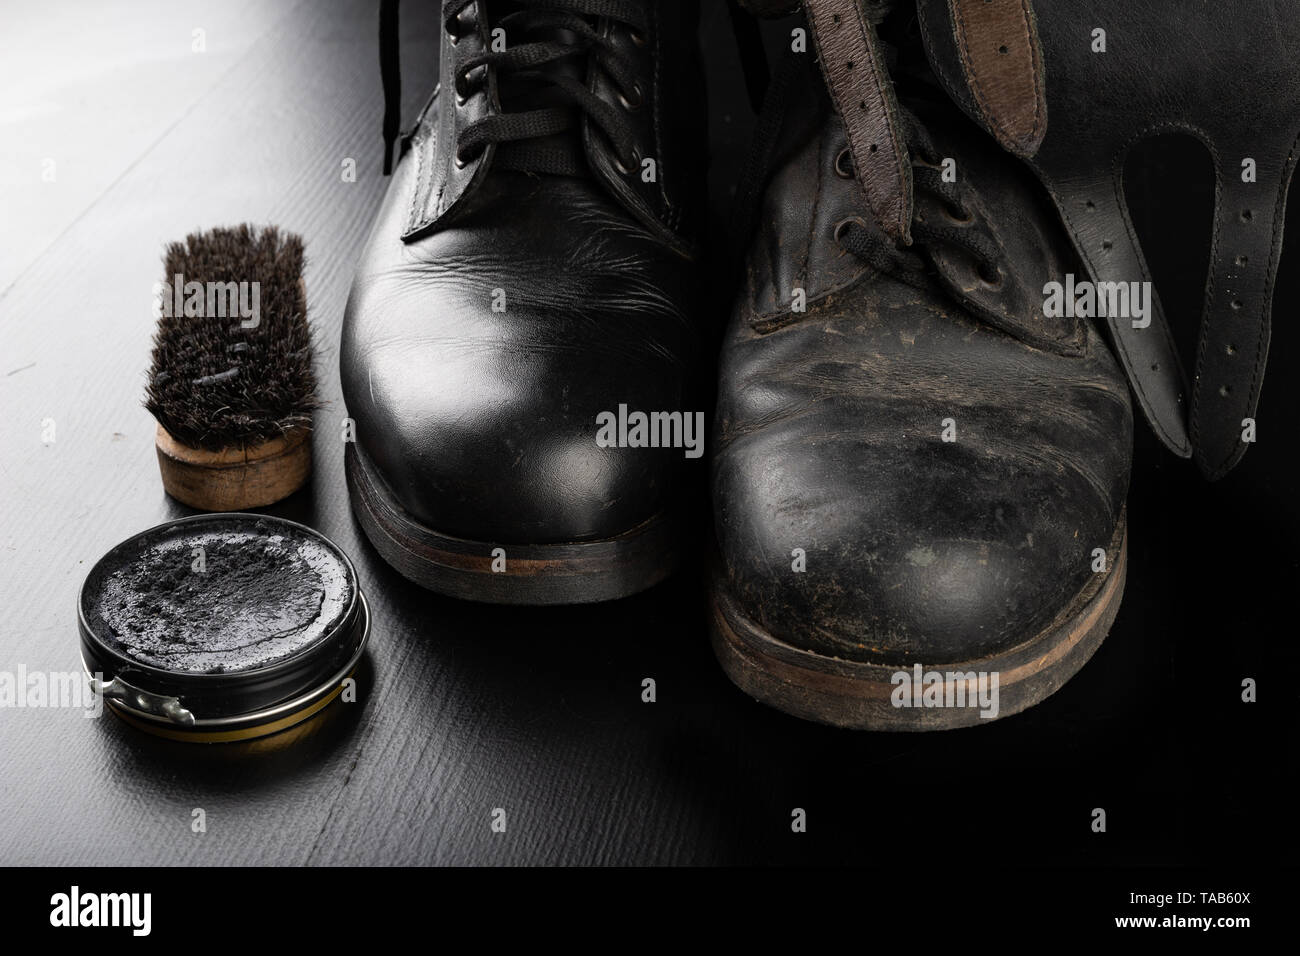 best way to polish black boots